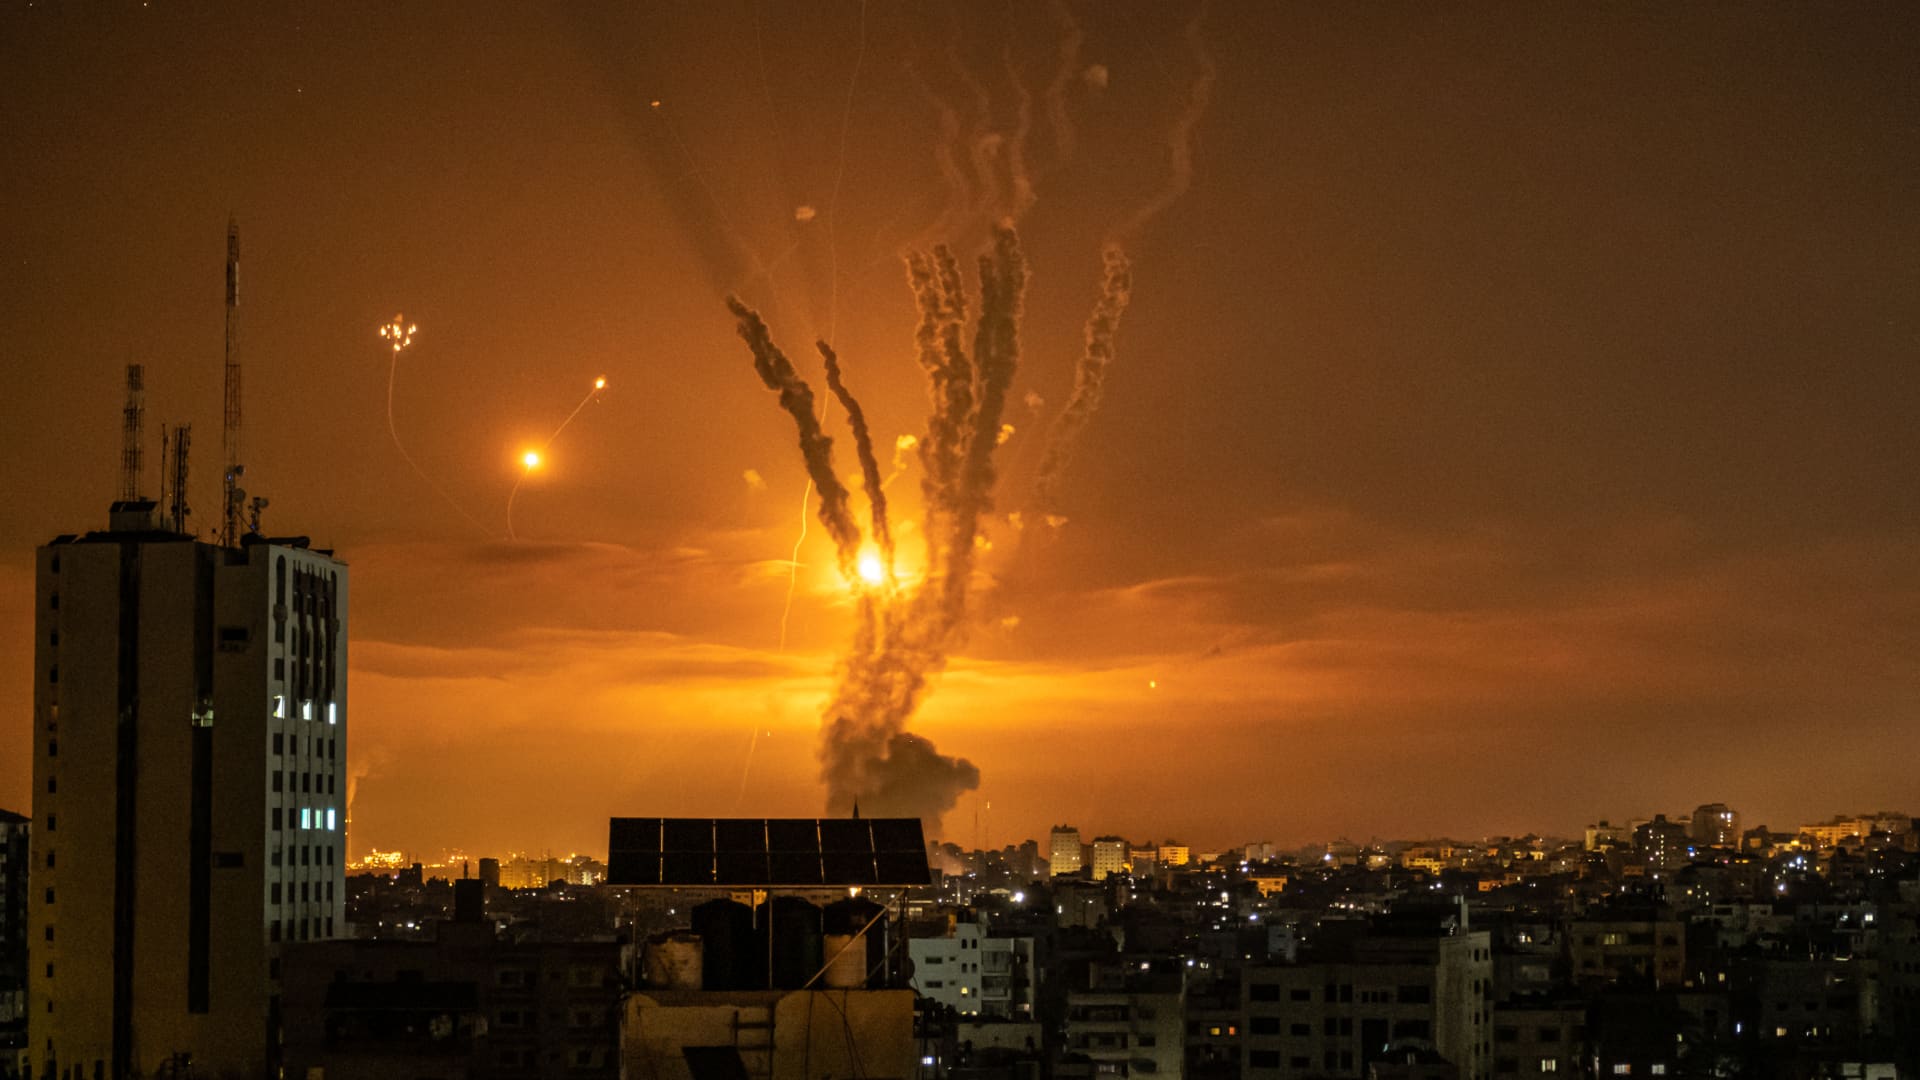 Rockets launched towards Israel from the northern Gaza Strip and response from the Israeli missile defense system known as the Iron Dome leave streaks through the sky on May 14, 2021 in Gaza City, Gaza.